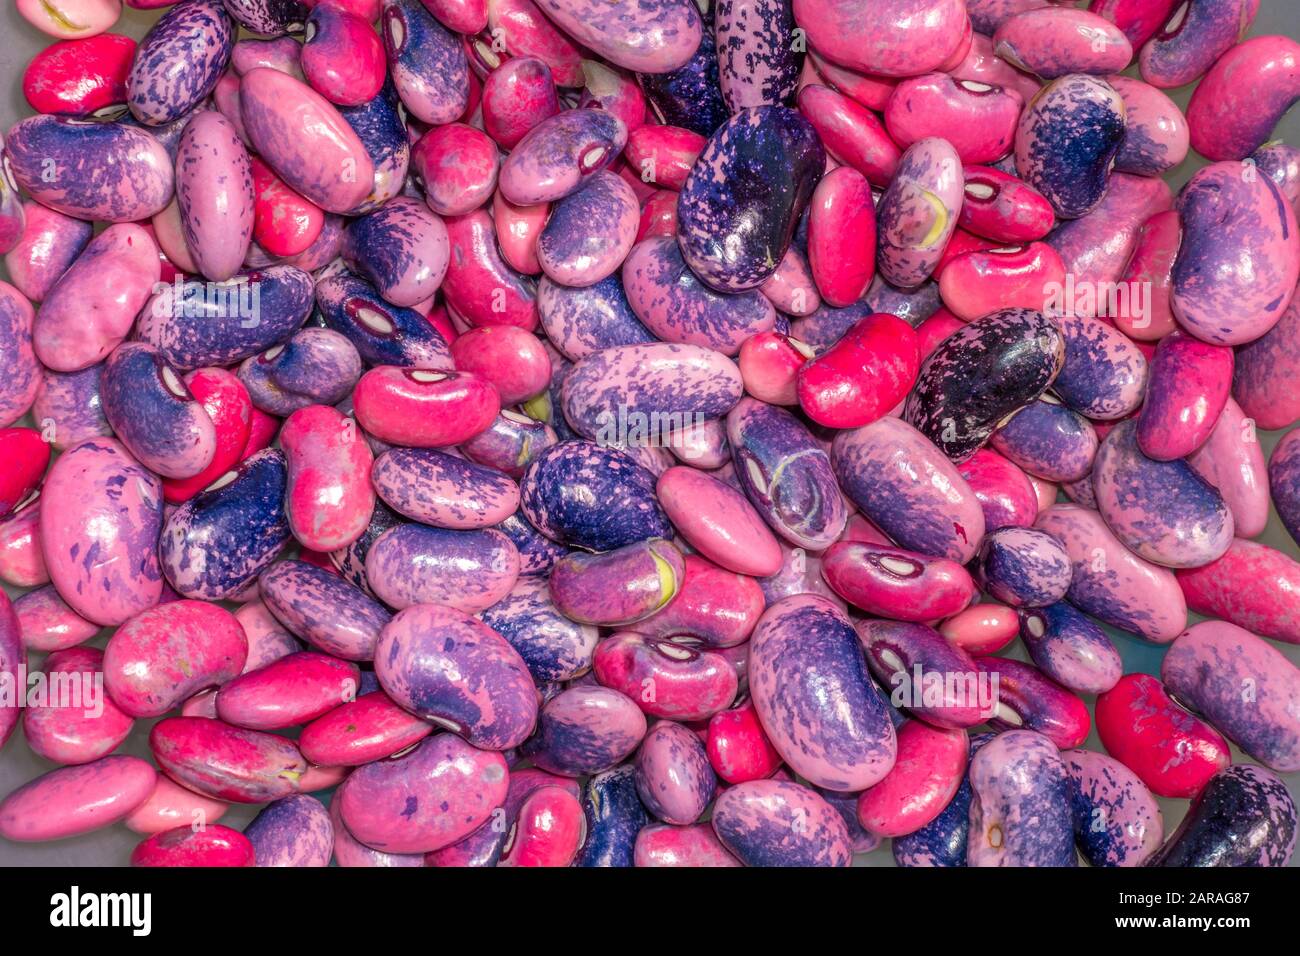 Closeup of raw pink and purple beans – the inner edible part from shelled runner beans. Stock Photo